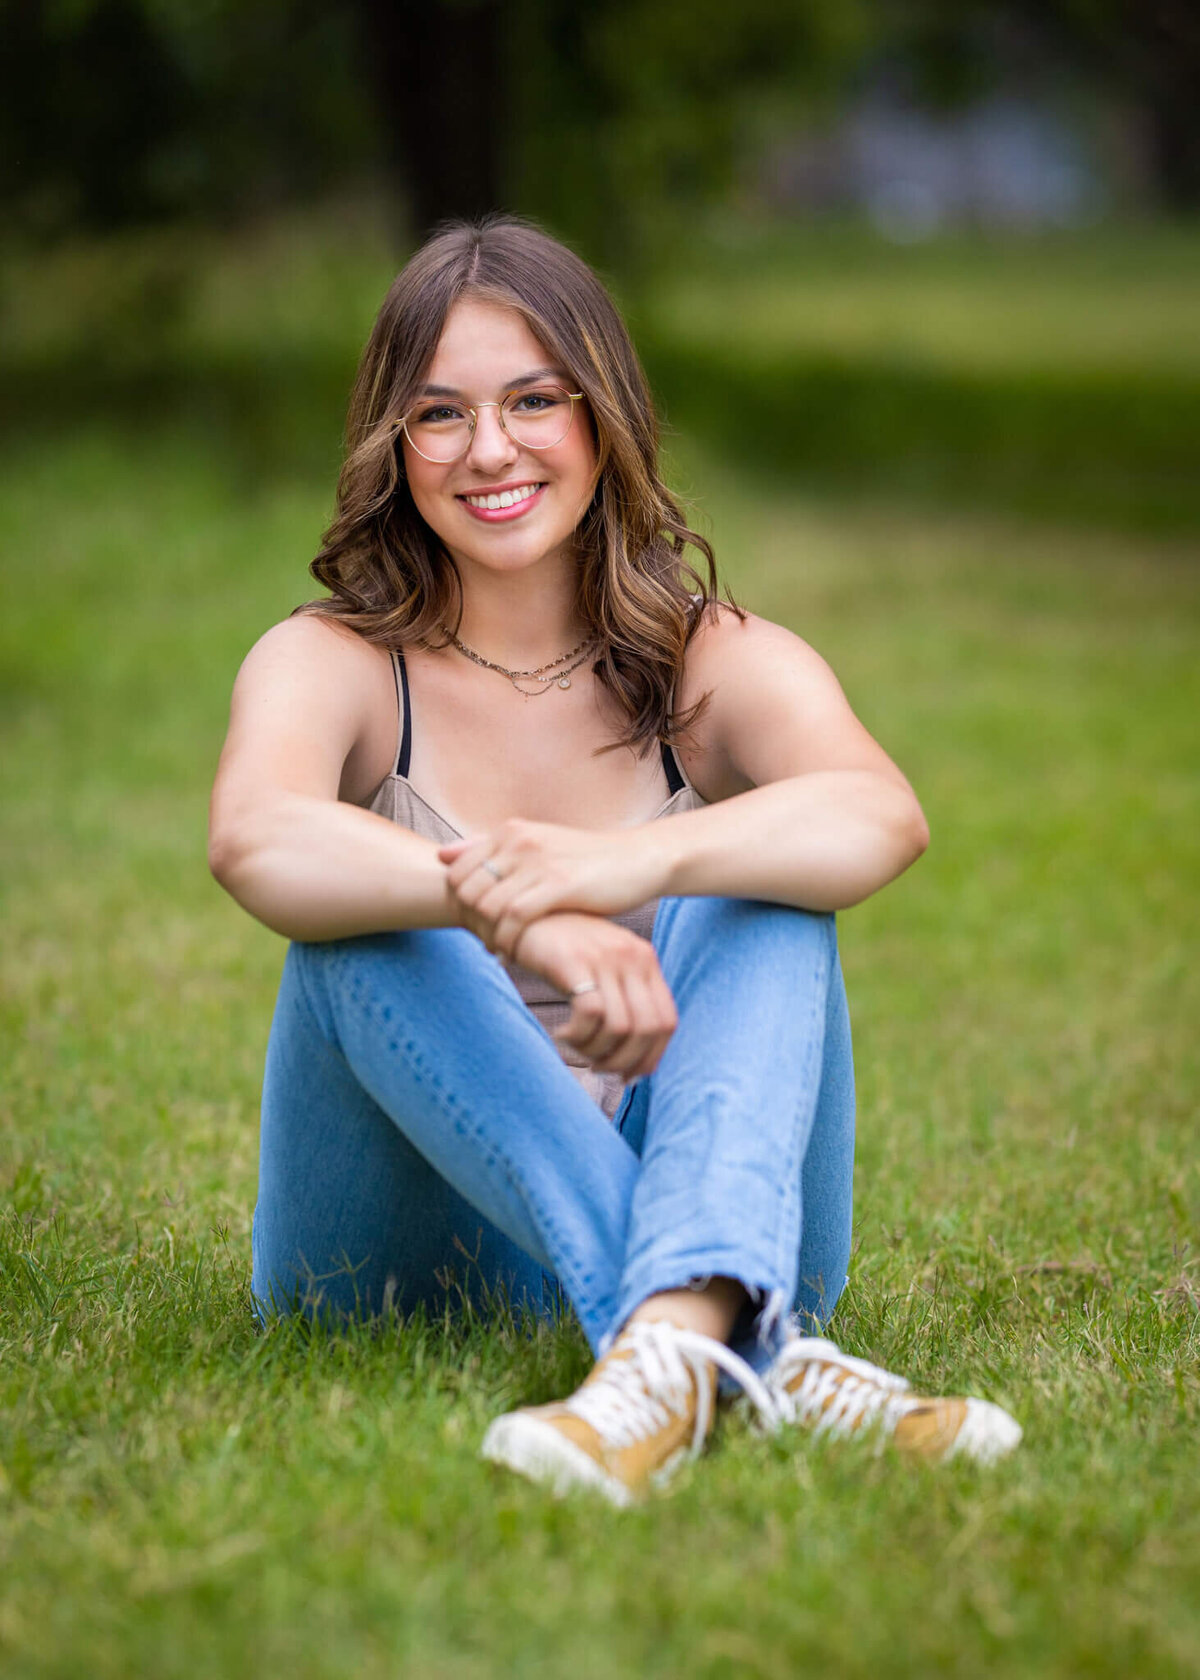 teenage girl wearing a tank top and jeans sitting in a grassy field